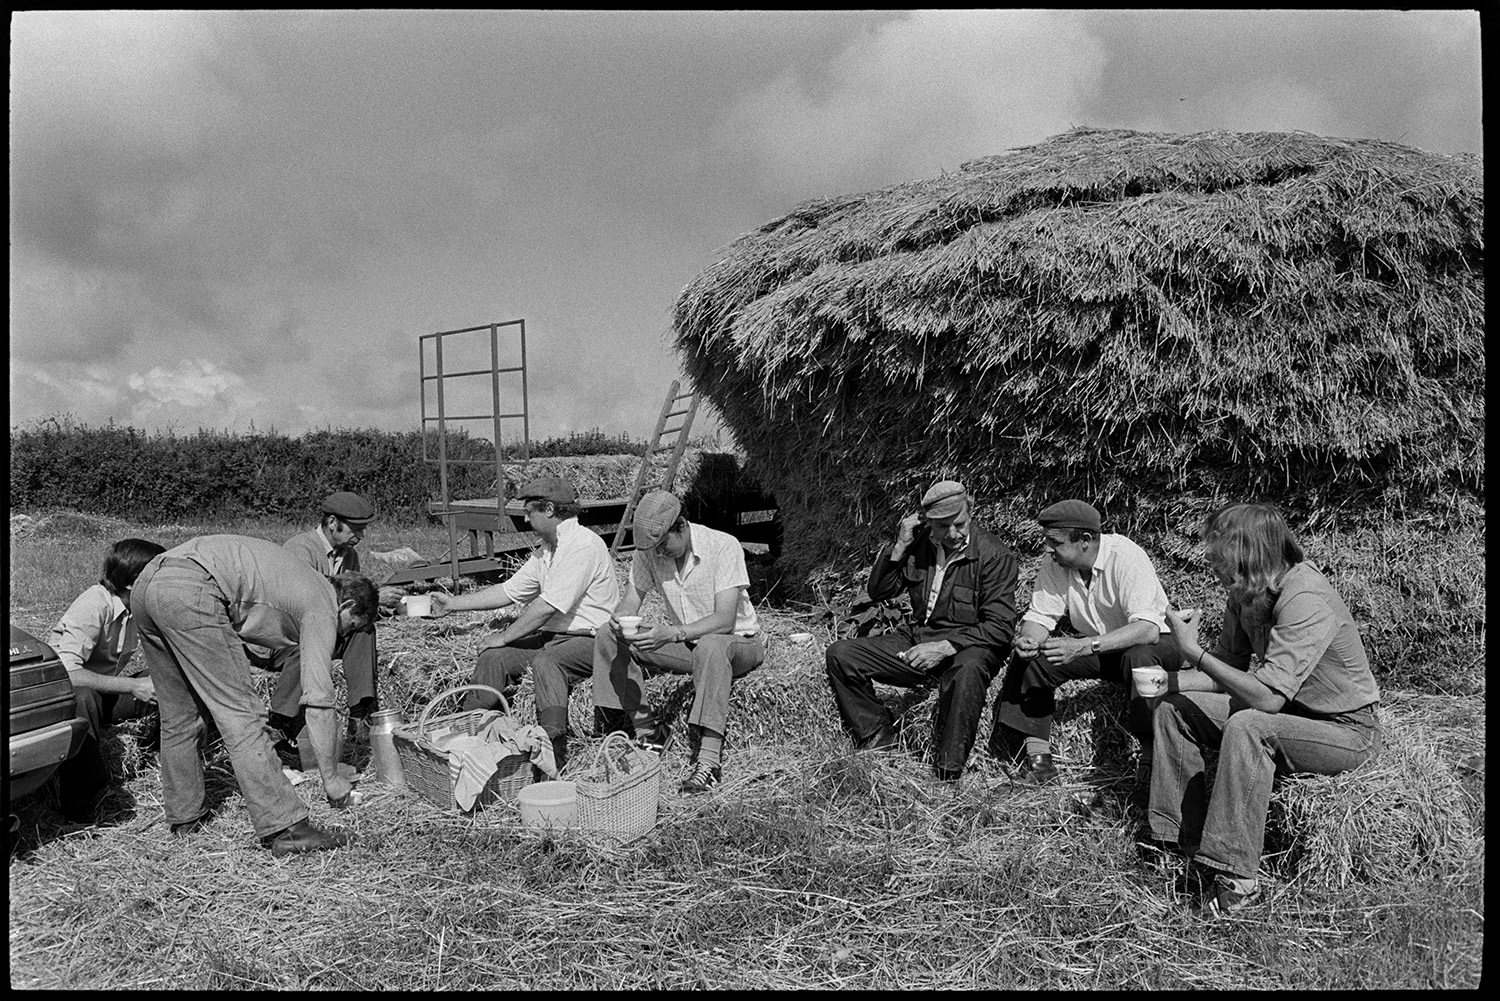 Reedcombing machine, nitches of reed, men working in sunlight. 
[Stephen Middleton and other men having a tea break from reedcombing, in a field at Westacott, Riddlecombe. They are sat on hay bales in front of the rick. Baskets of food and a flask of tea are on the ground in front of them. A trailer and ladder can be seen in the background.]